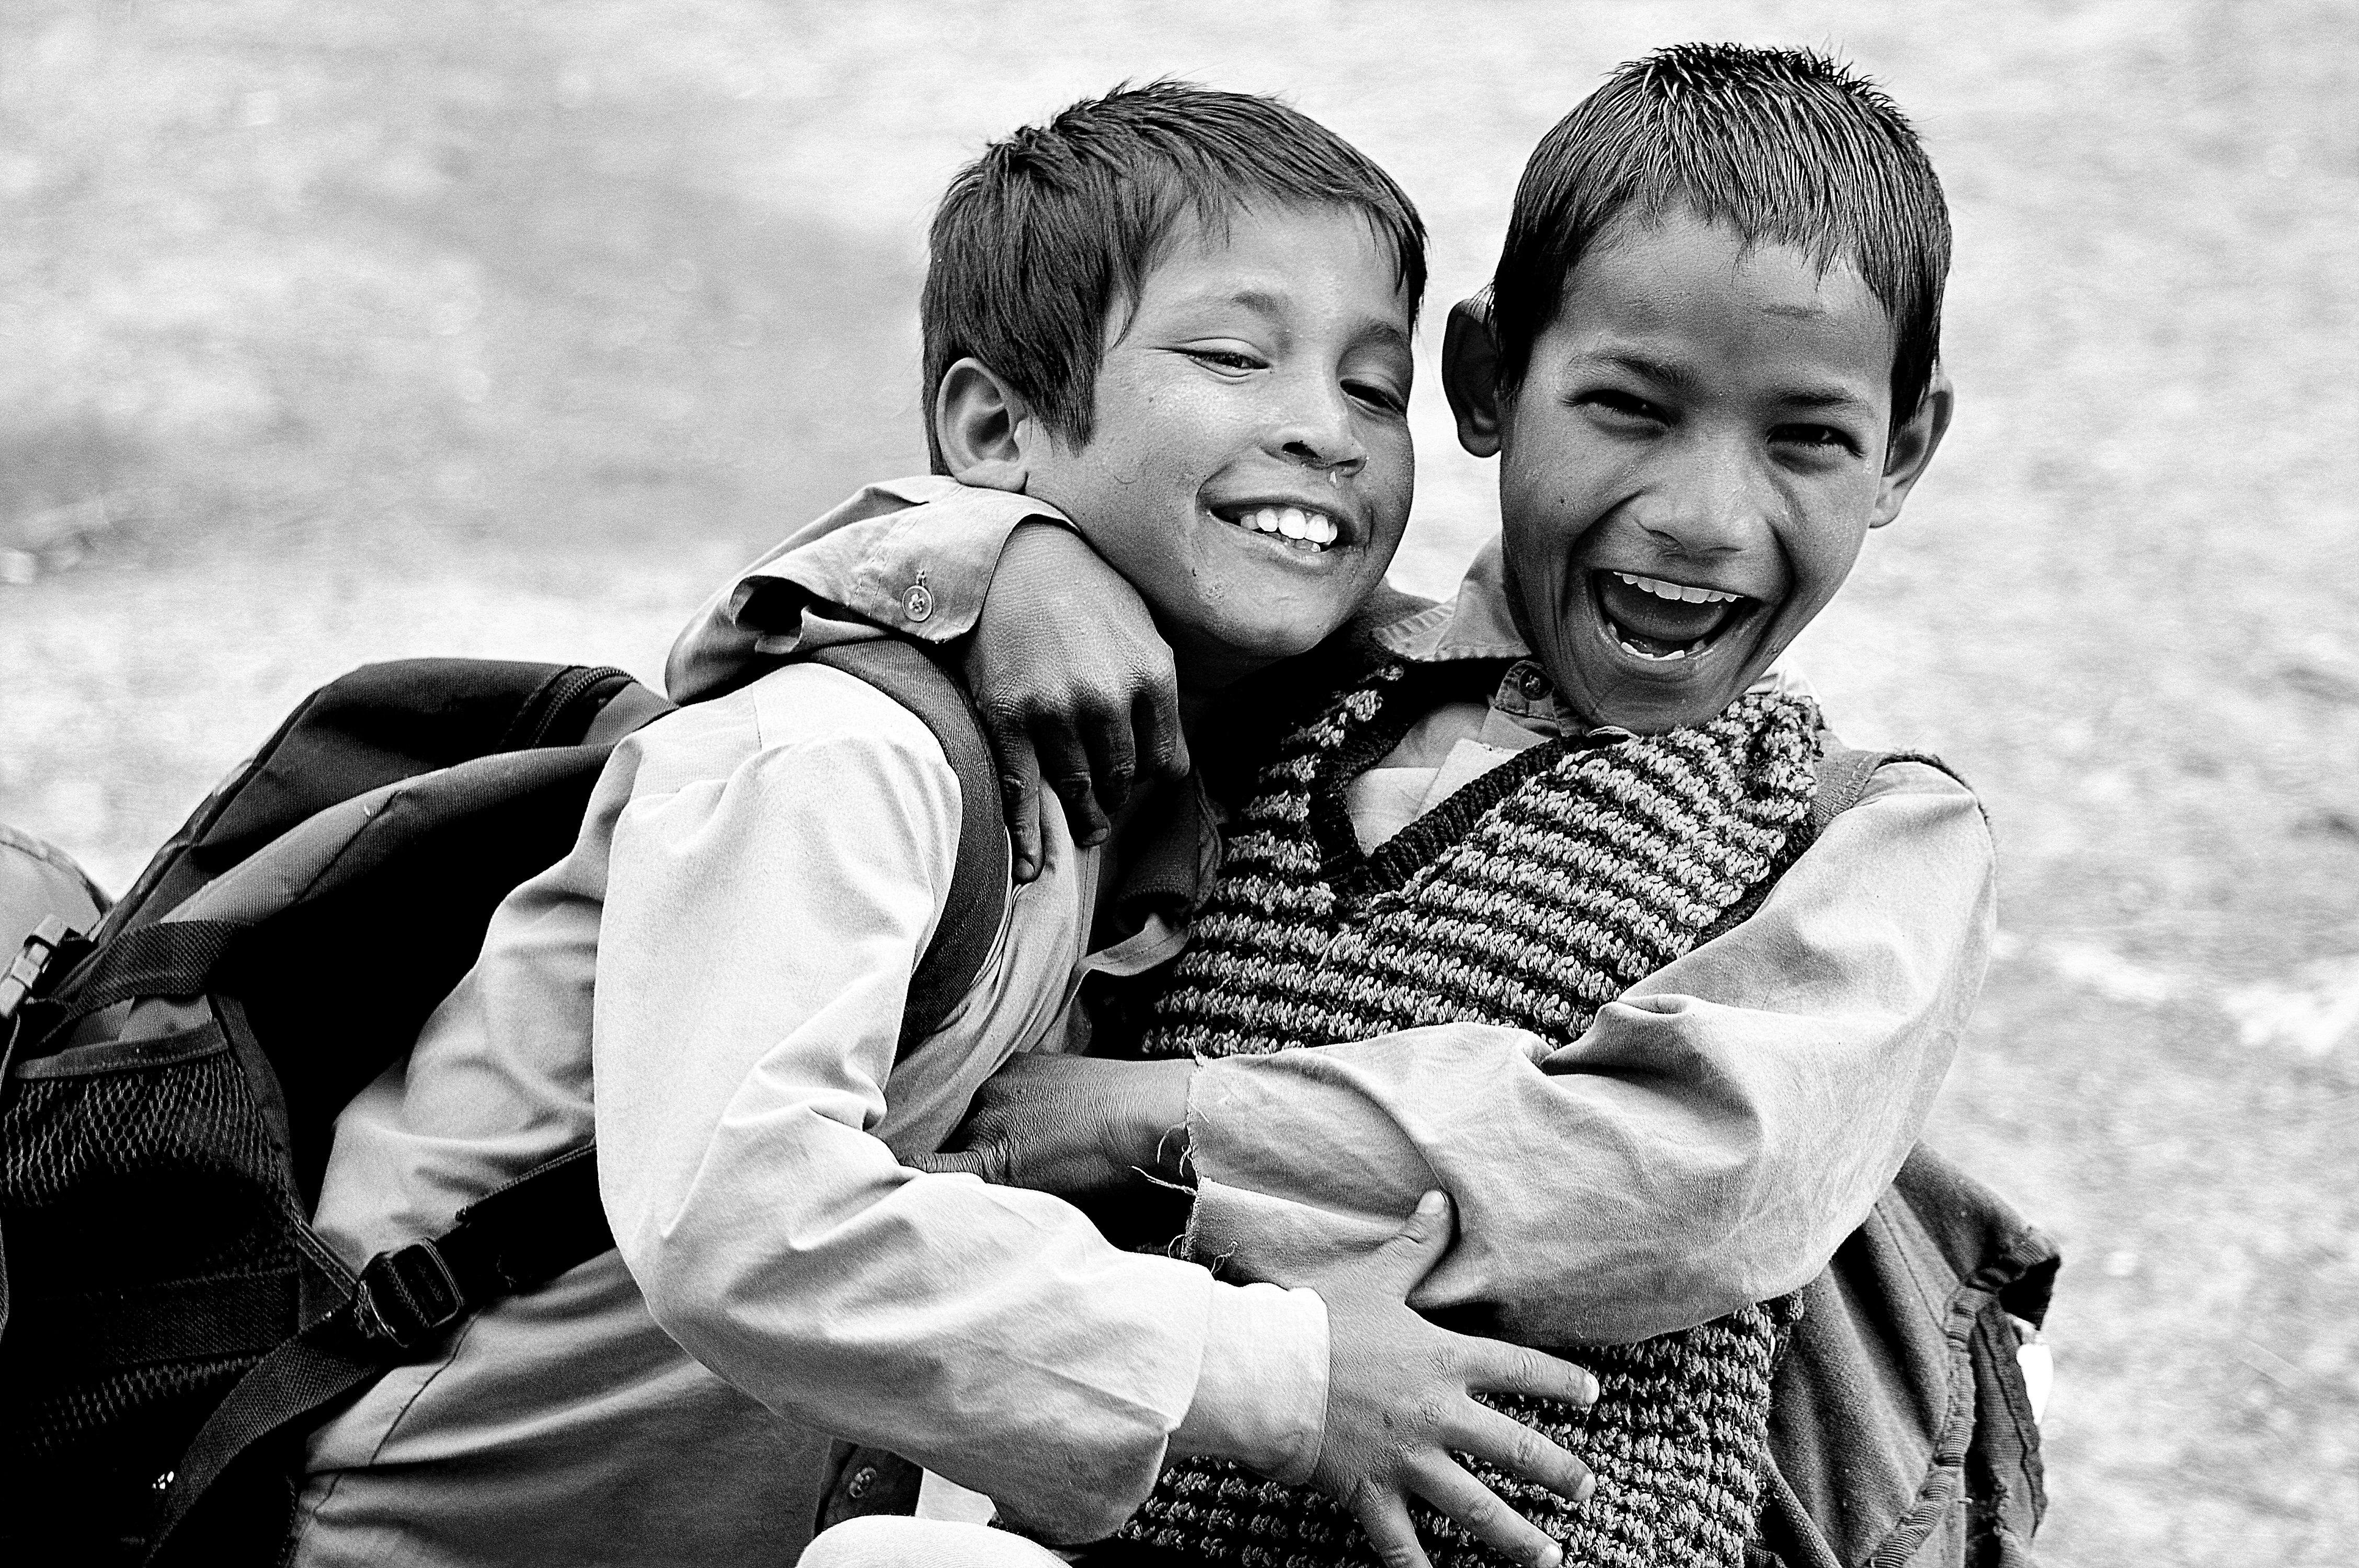 grayscale photography of two boys hugging while laughing